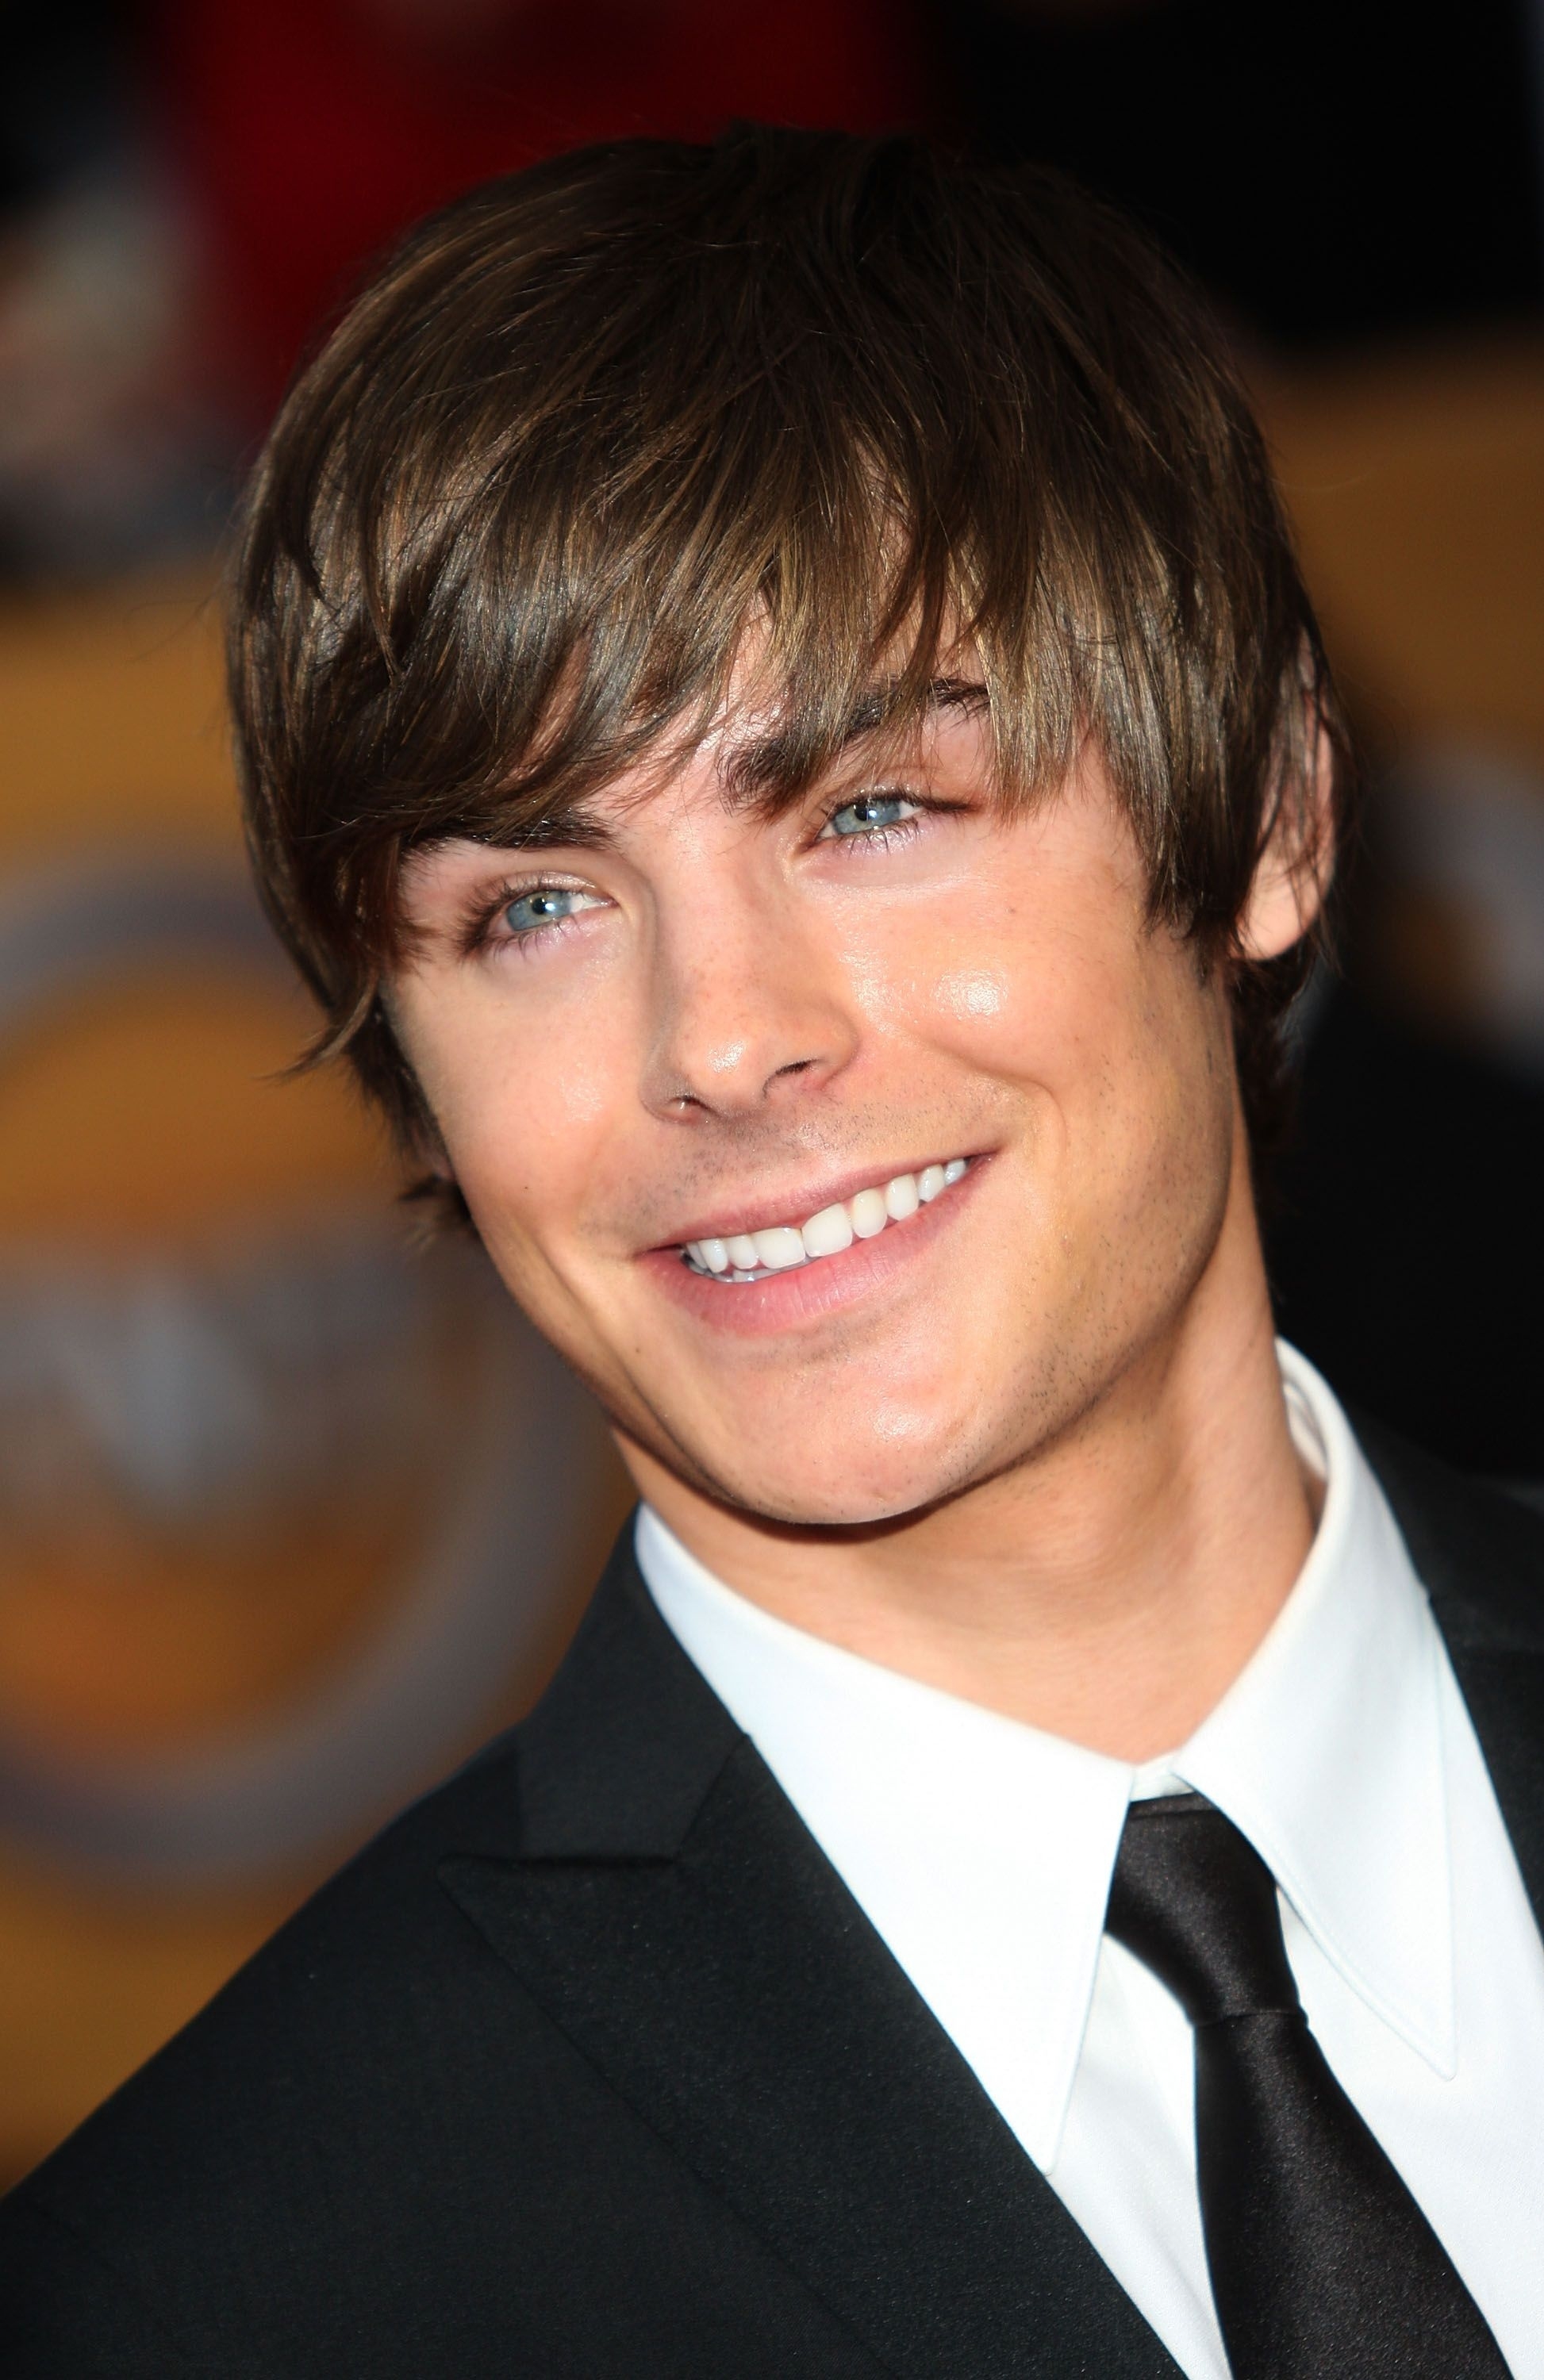 17 Againbest Show. Your Only A Man If You Can Admit That within Zac Efron 17 Again Haircut